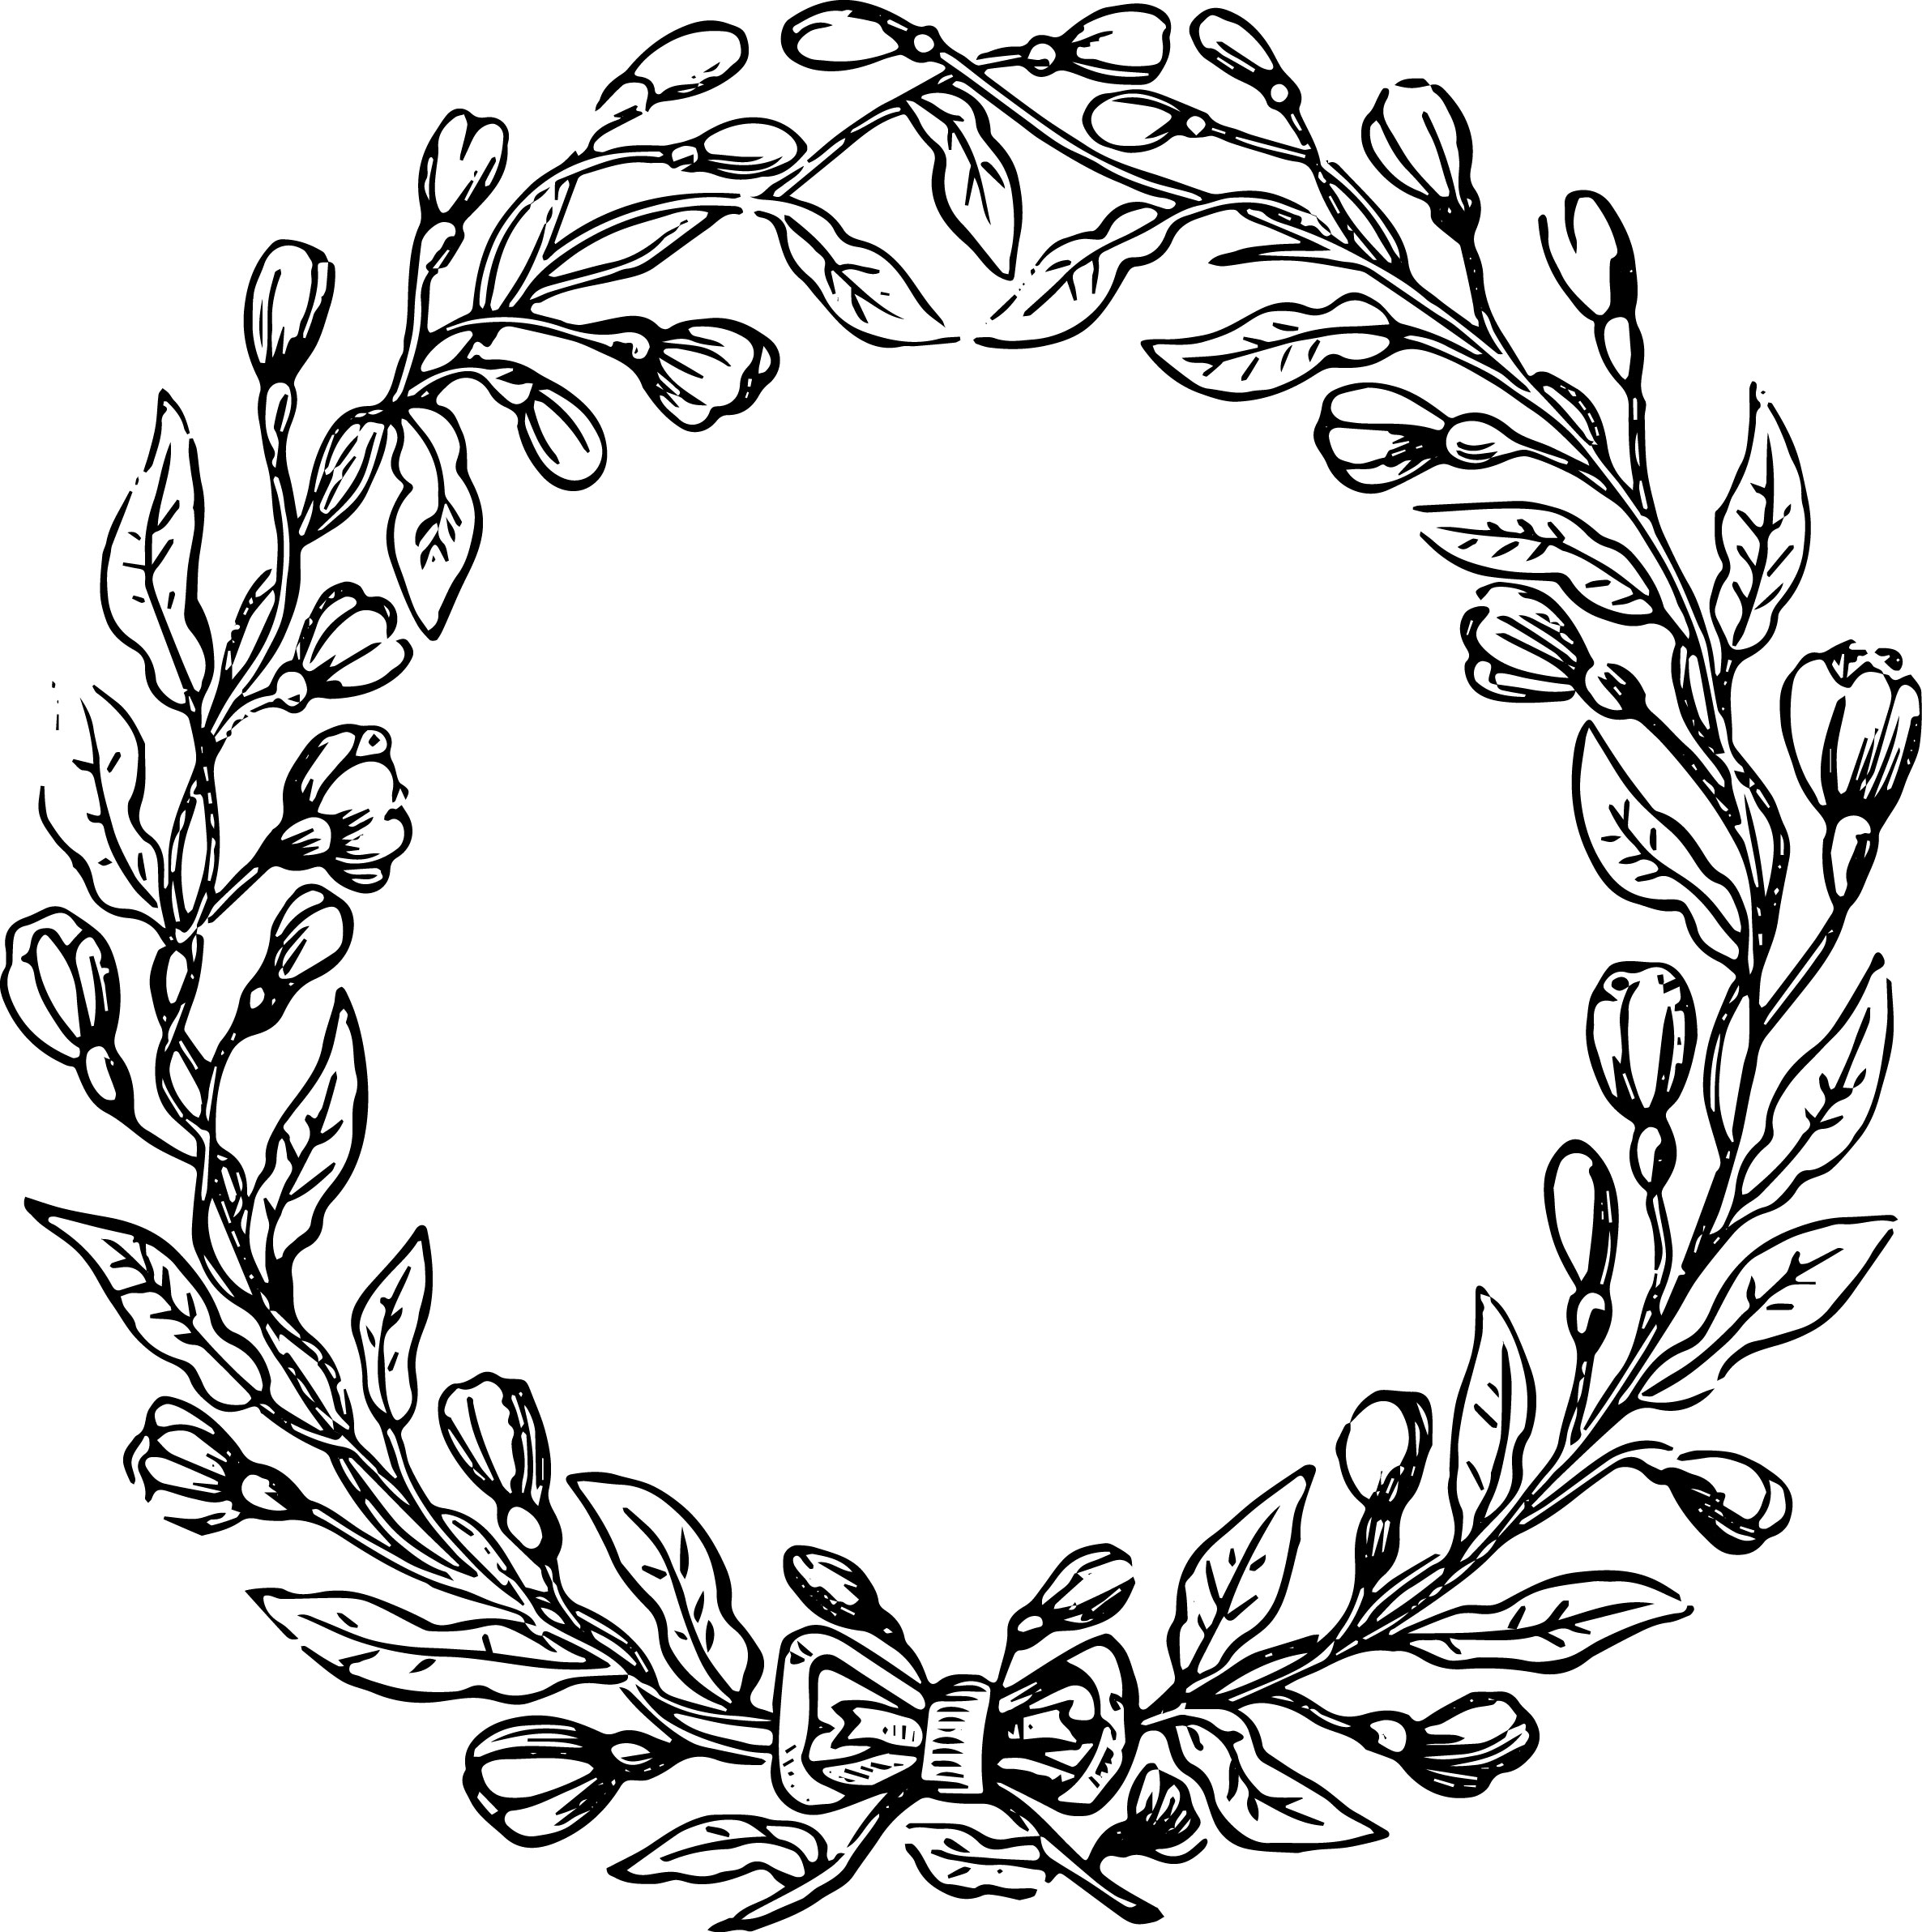 Free vector file and clip art image vintage floral wreath oh